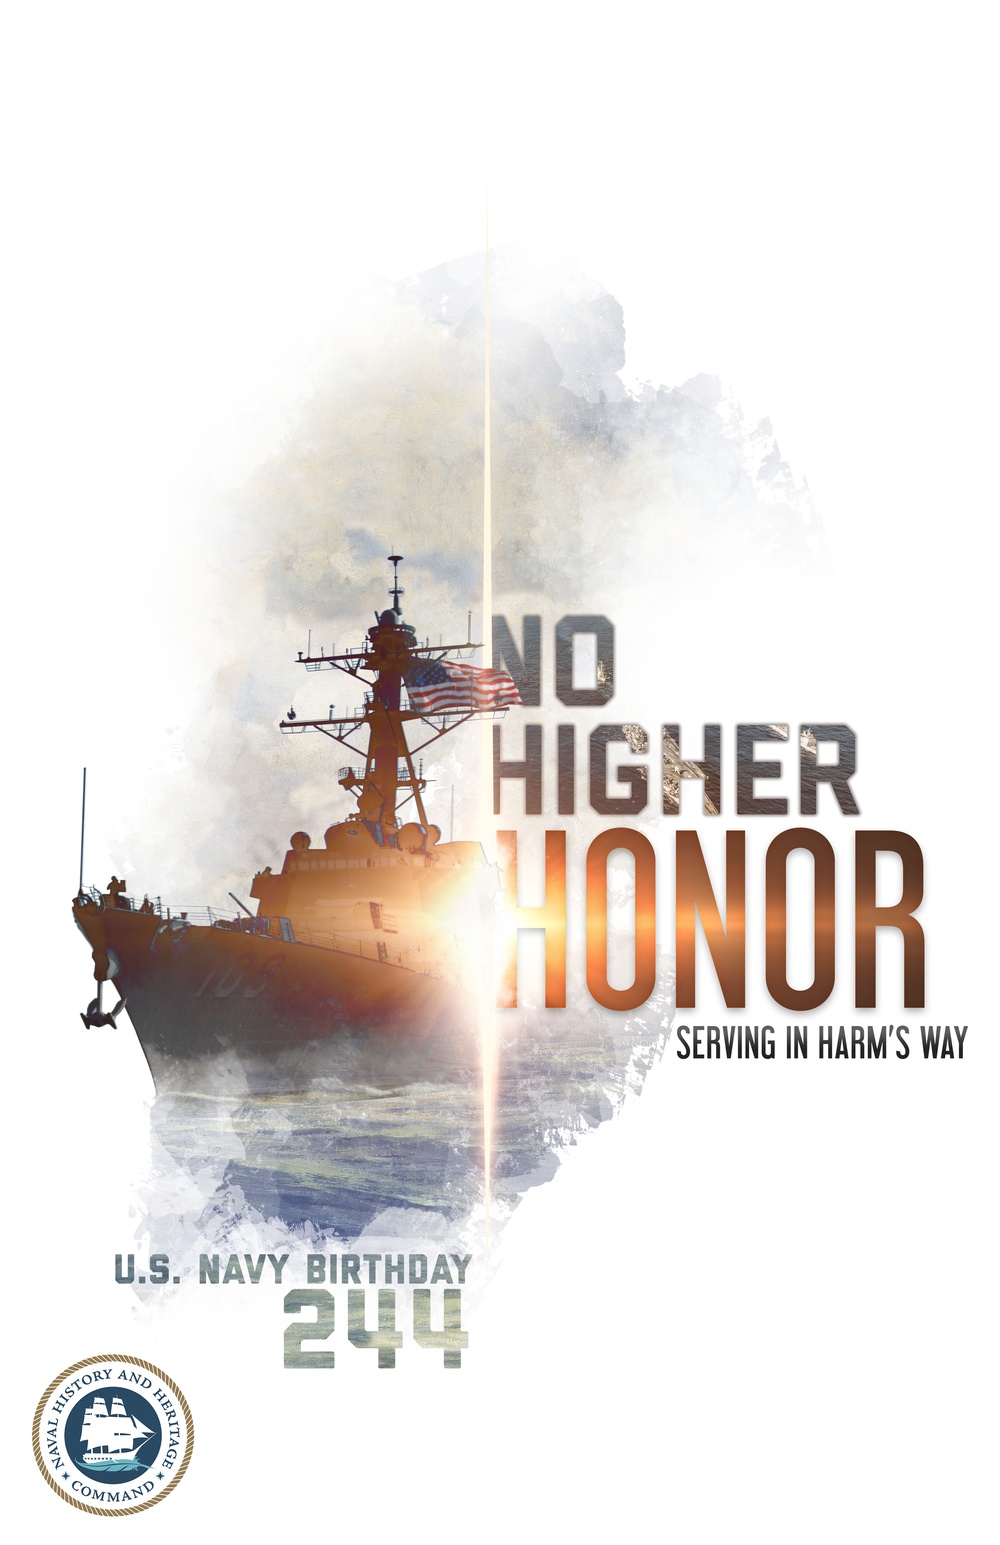 Navy Birthday 244 No Higher Honor - Surface - Poster